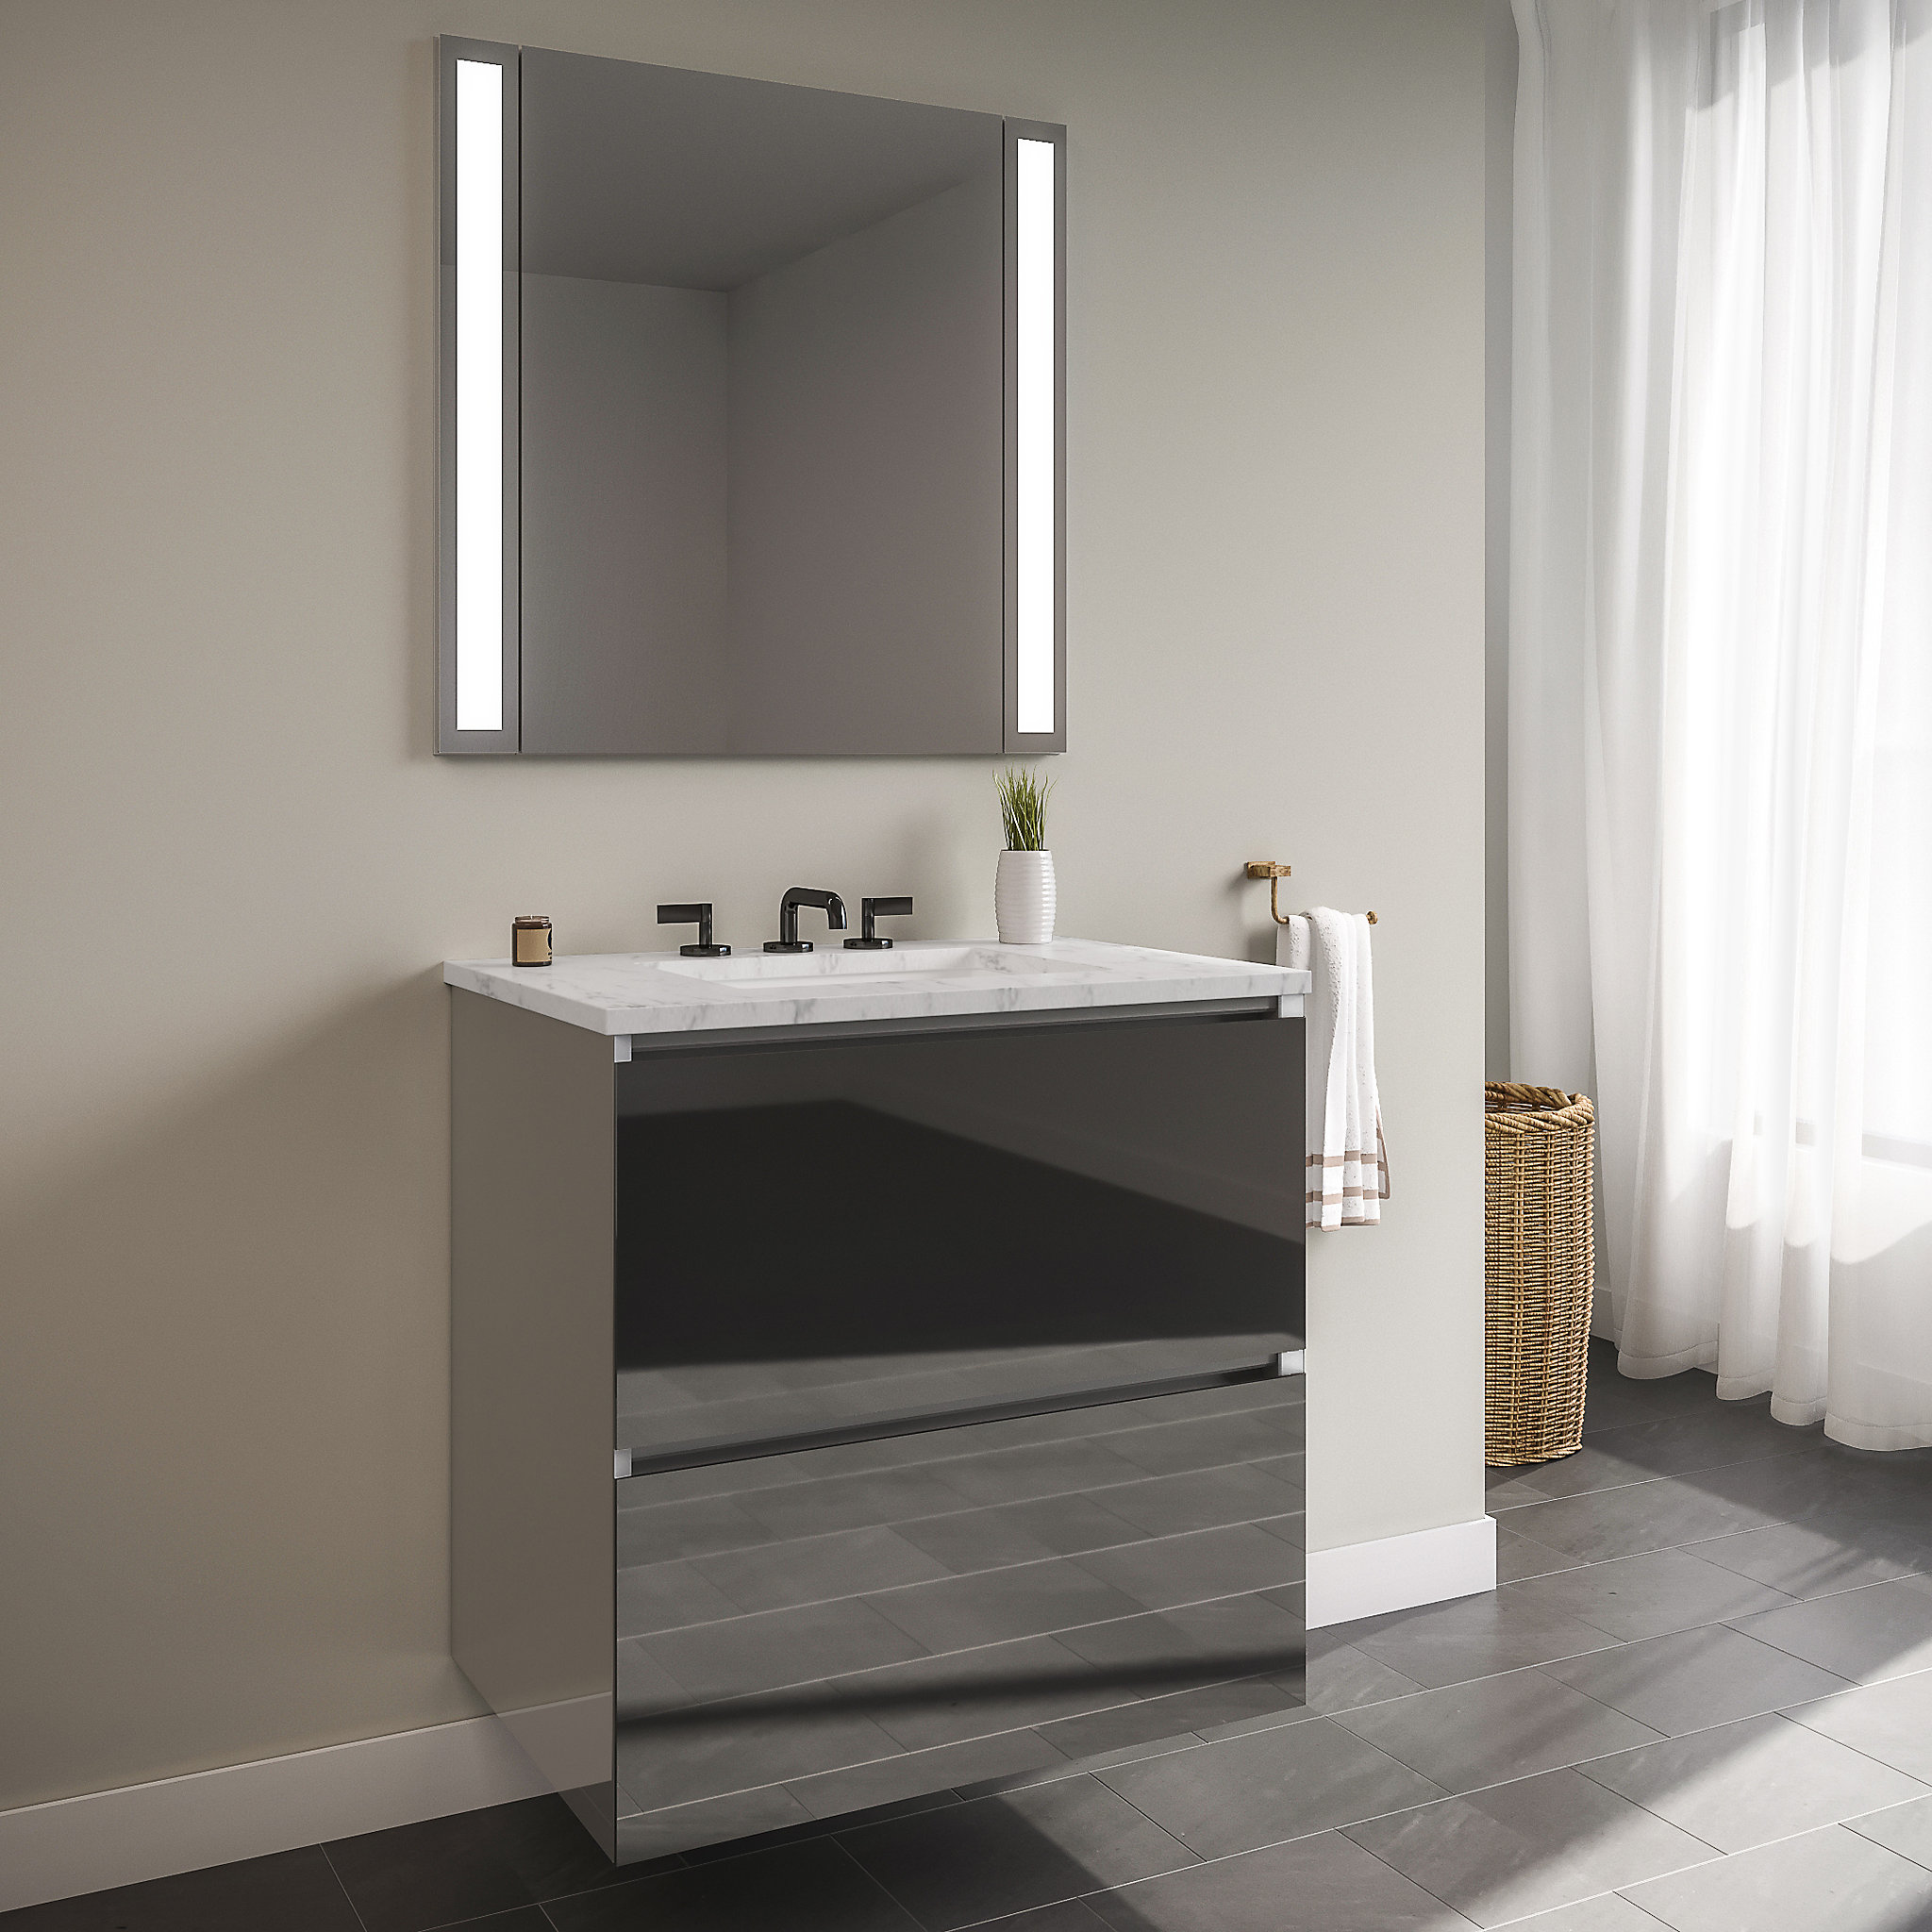 Robern 24119400NB00002 Curated Cartesian Vanity, 24" x 15" x 21", Two Drawer, Tinted Gray Mirror Glass, Plumbing Drawer, Full Dr